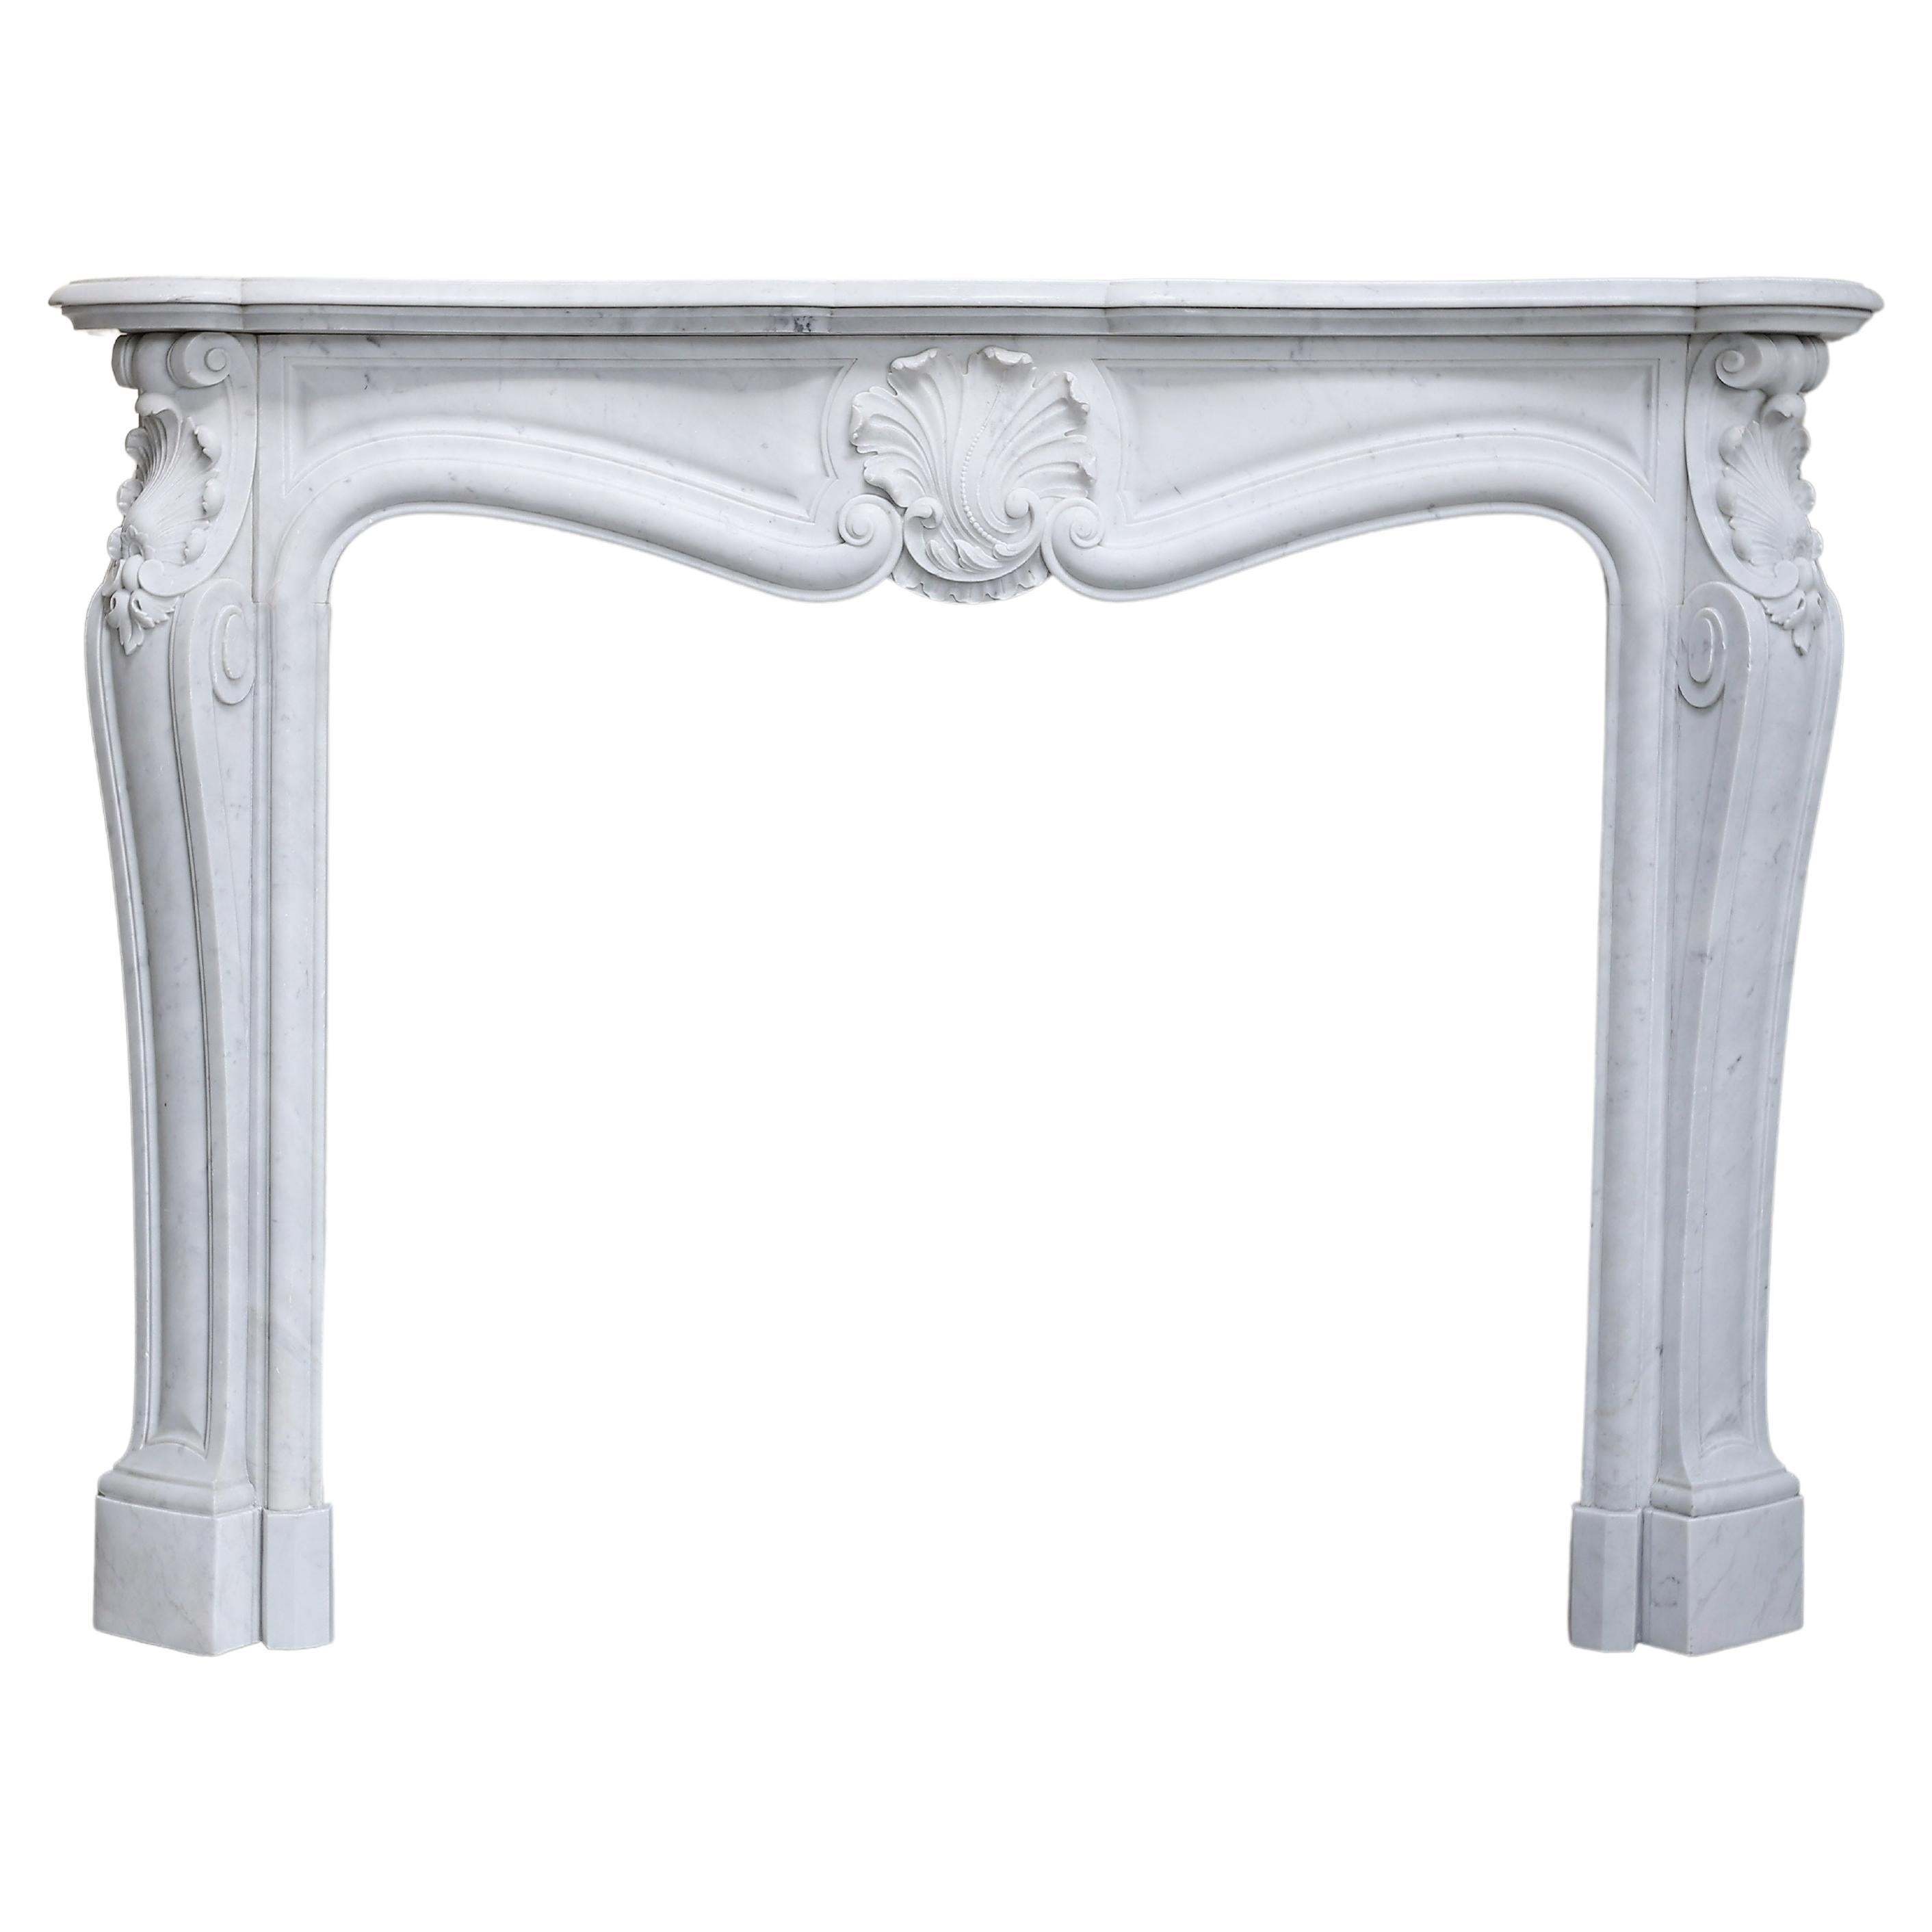 Antique Fireplace of Carrara Marble in Style of Louis XV from the 19th Century